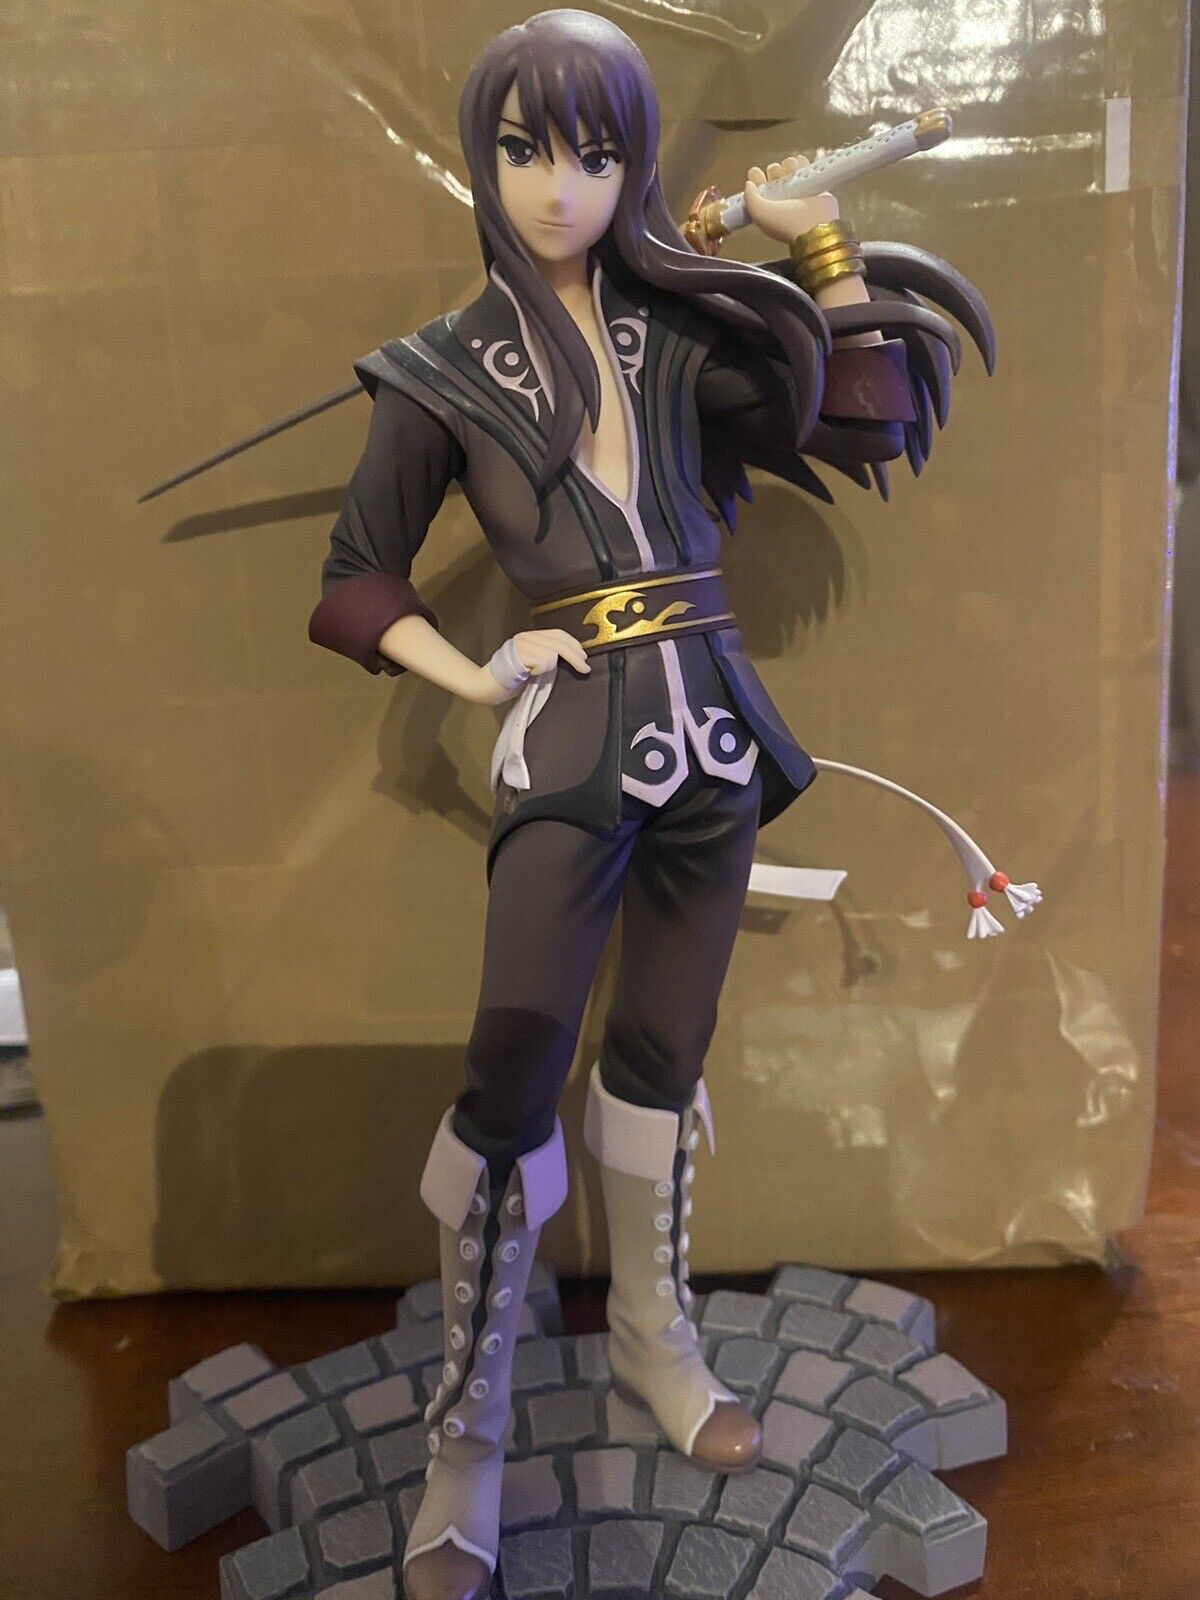 Alter Tales of Vesperia Yuri Lowell 1/8 Scale PVC Figure By Altair Japan